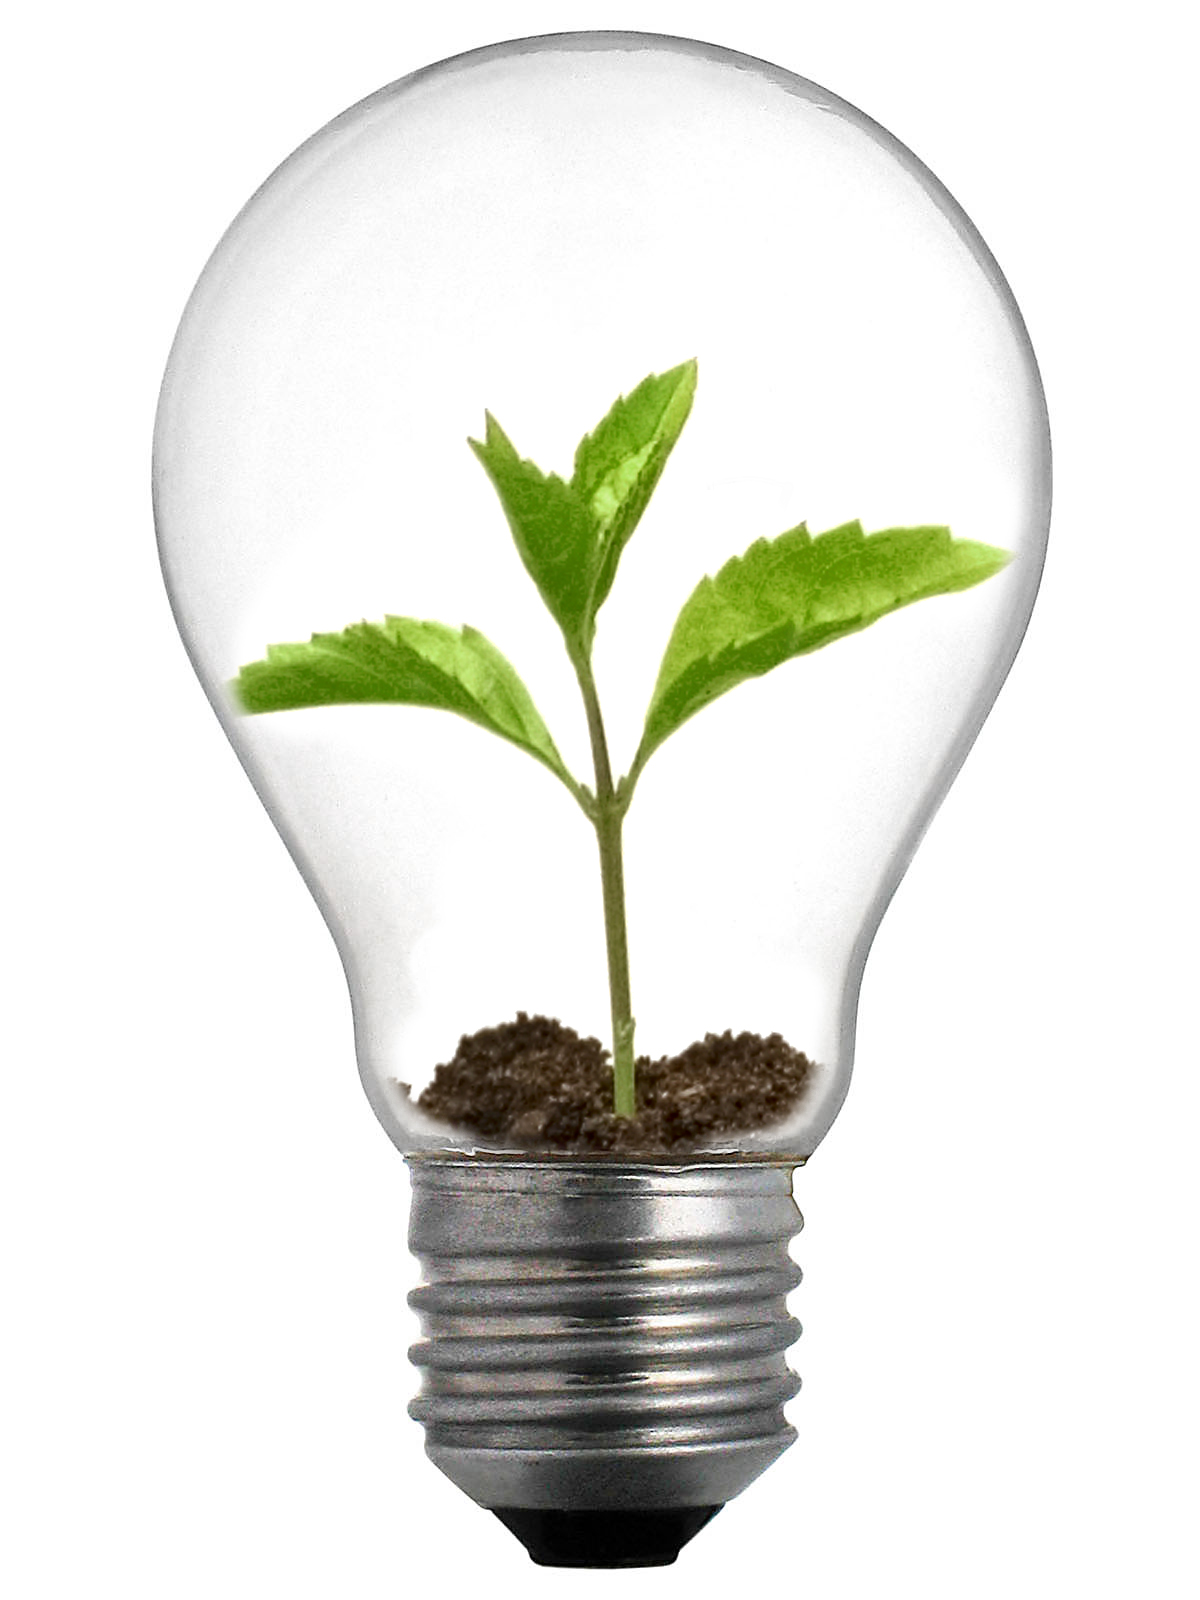 New range of light bulbs from Bulbrite - Promoting Eco Friendly ...